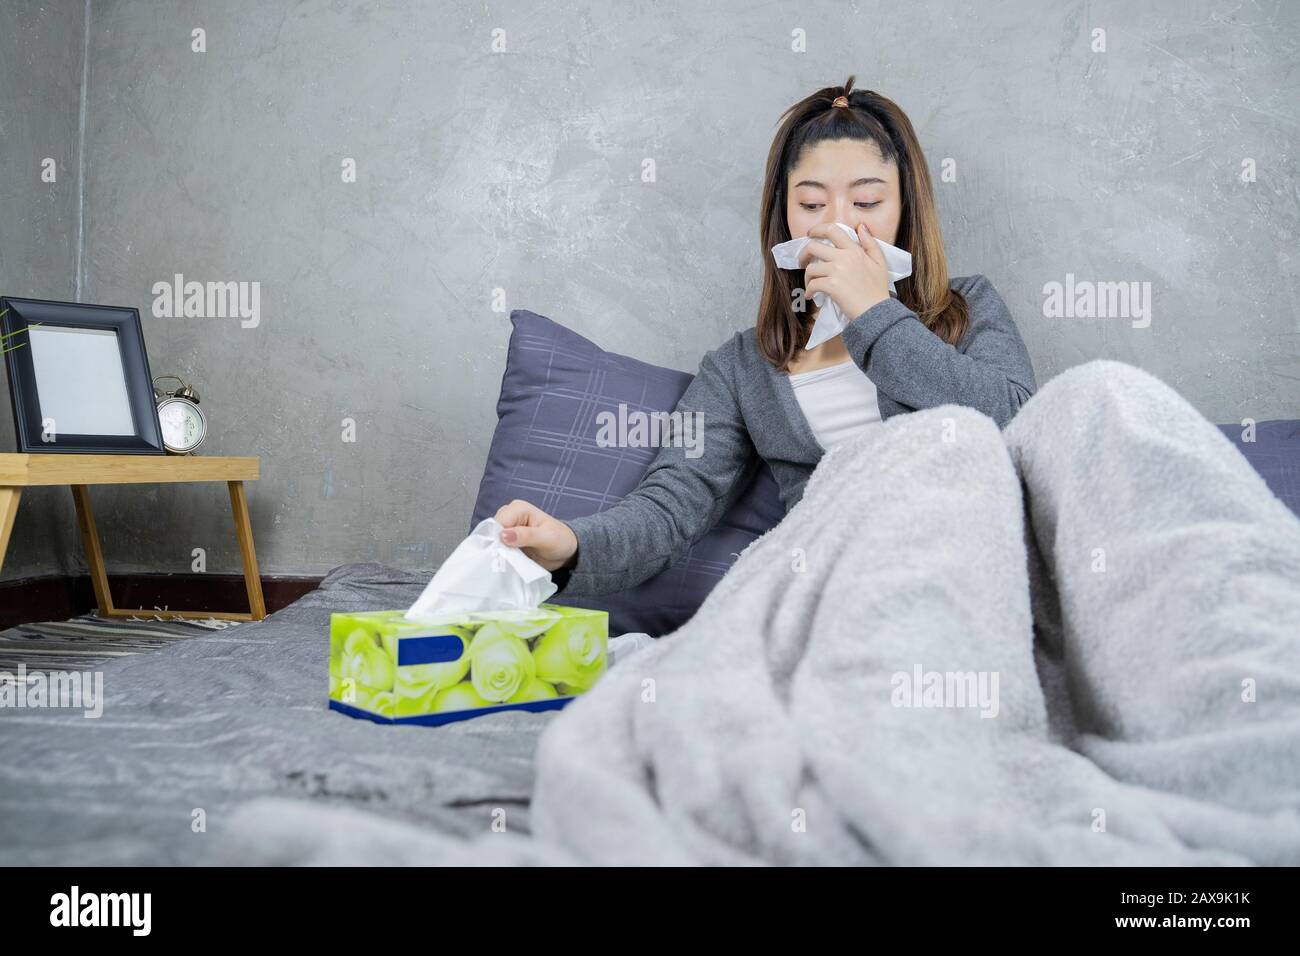 Sick day at home. Asian woman has runny nose and common cold. Cough. Beautiful Young Woman Caught Cold Or Flu Illness. Stock Photo